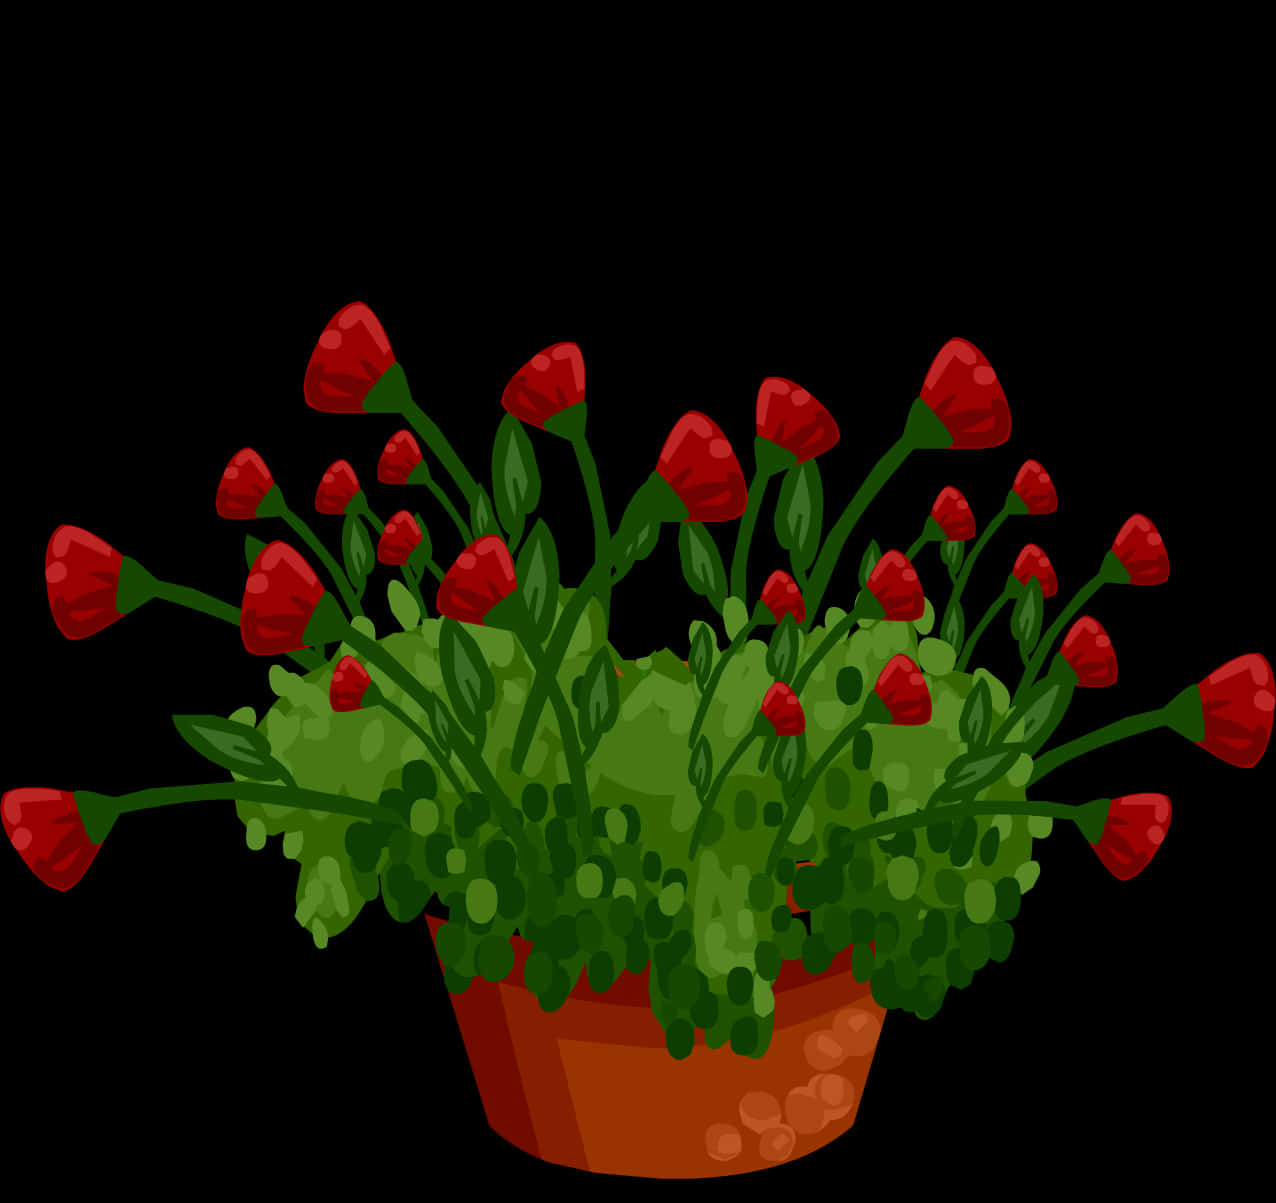 A Potted Plant With Red Flowers